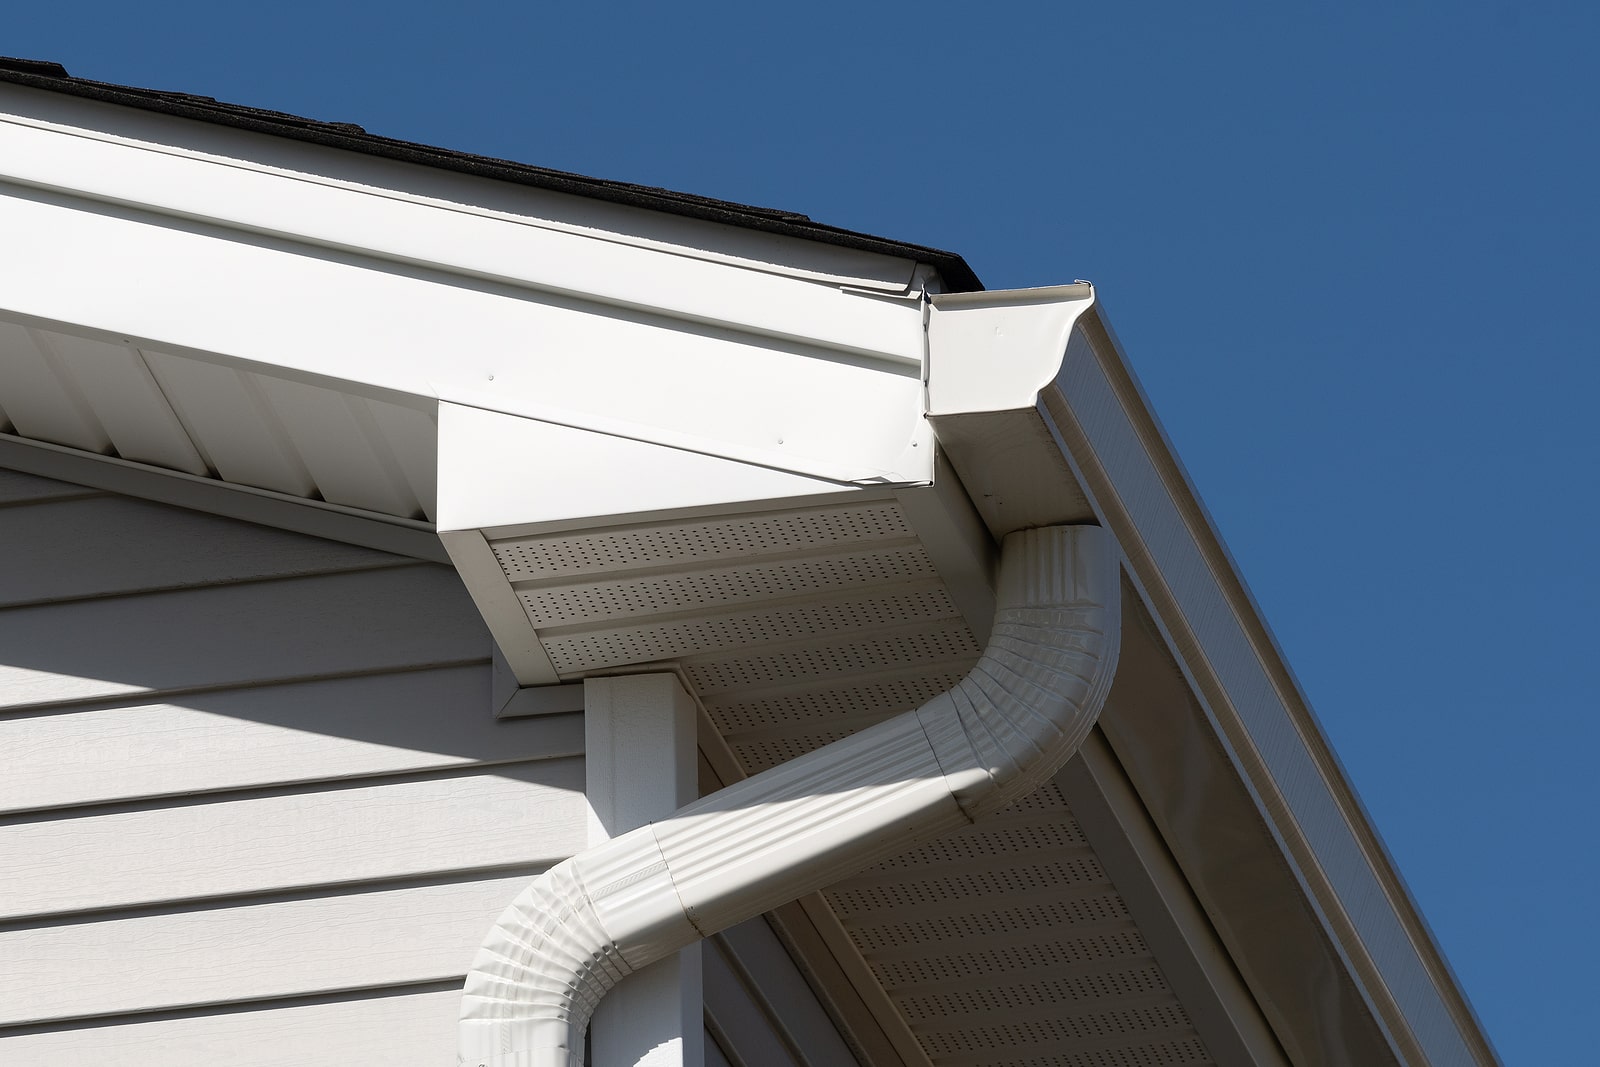 Siding and Gutter Replacement in Decatur, GA